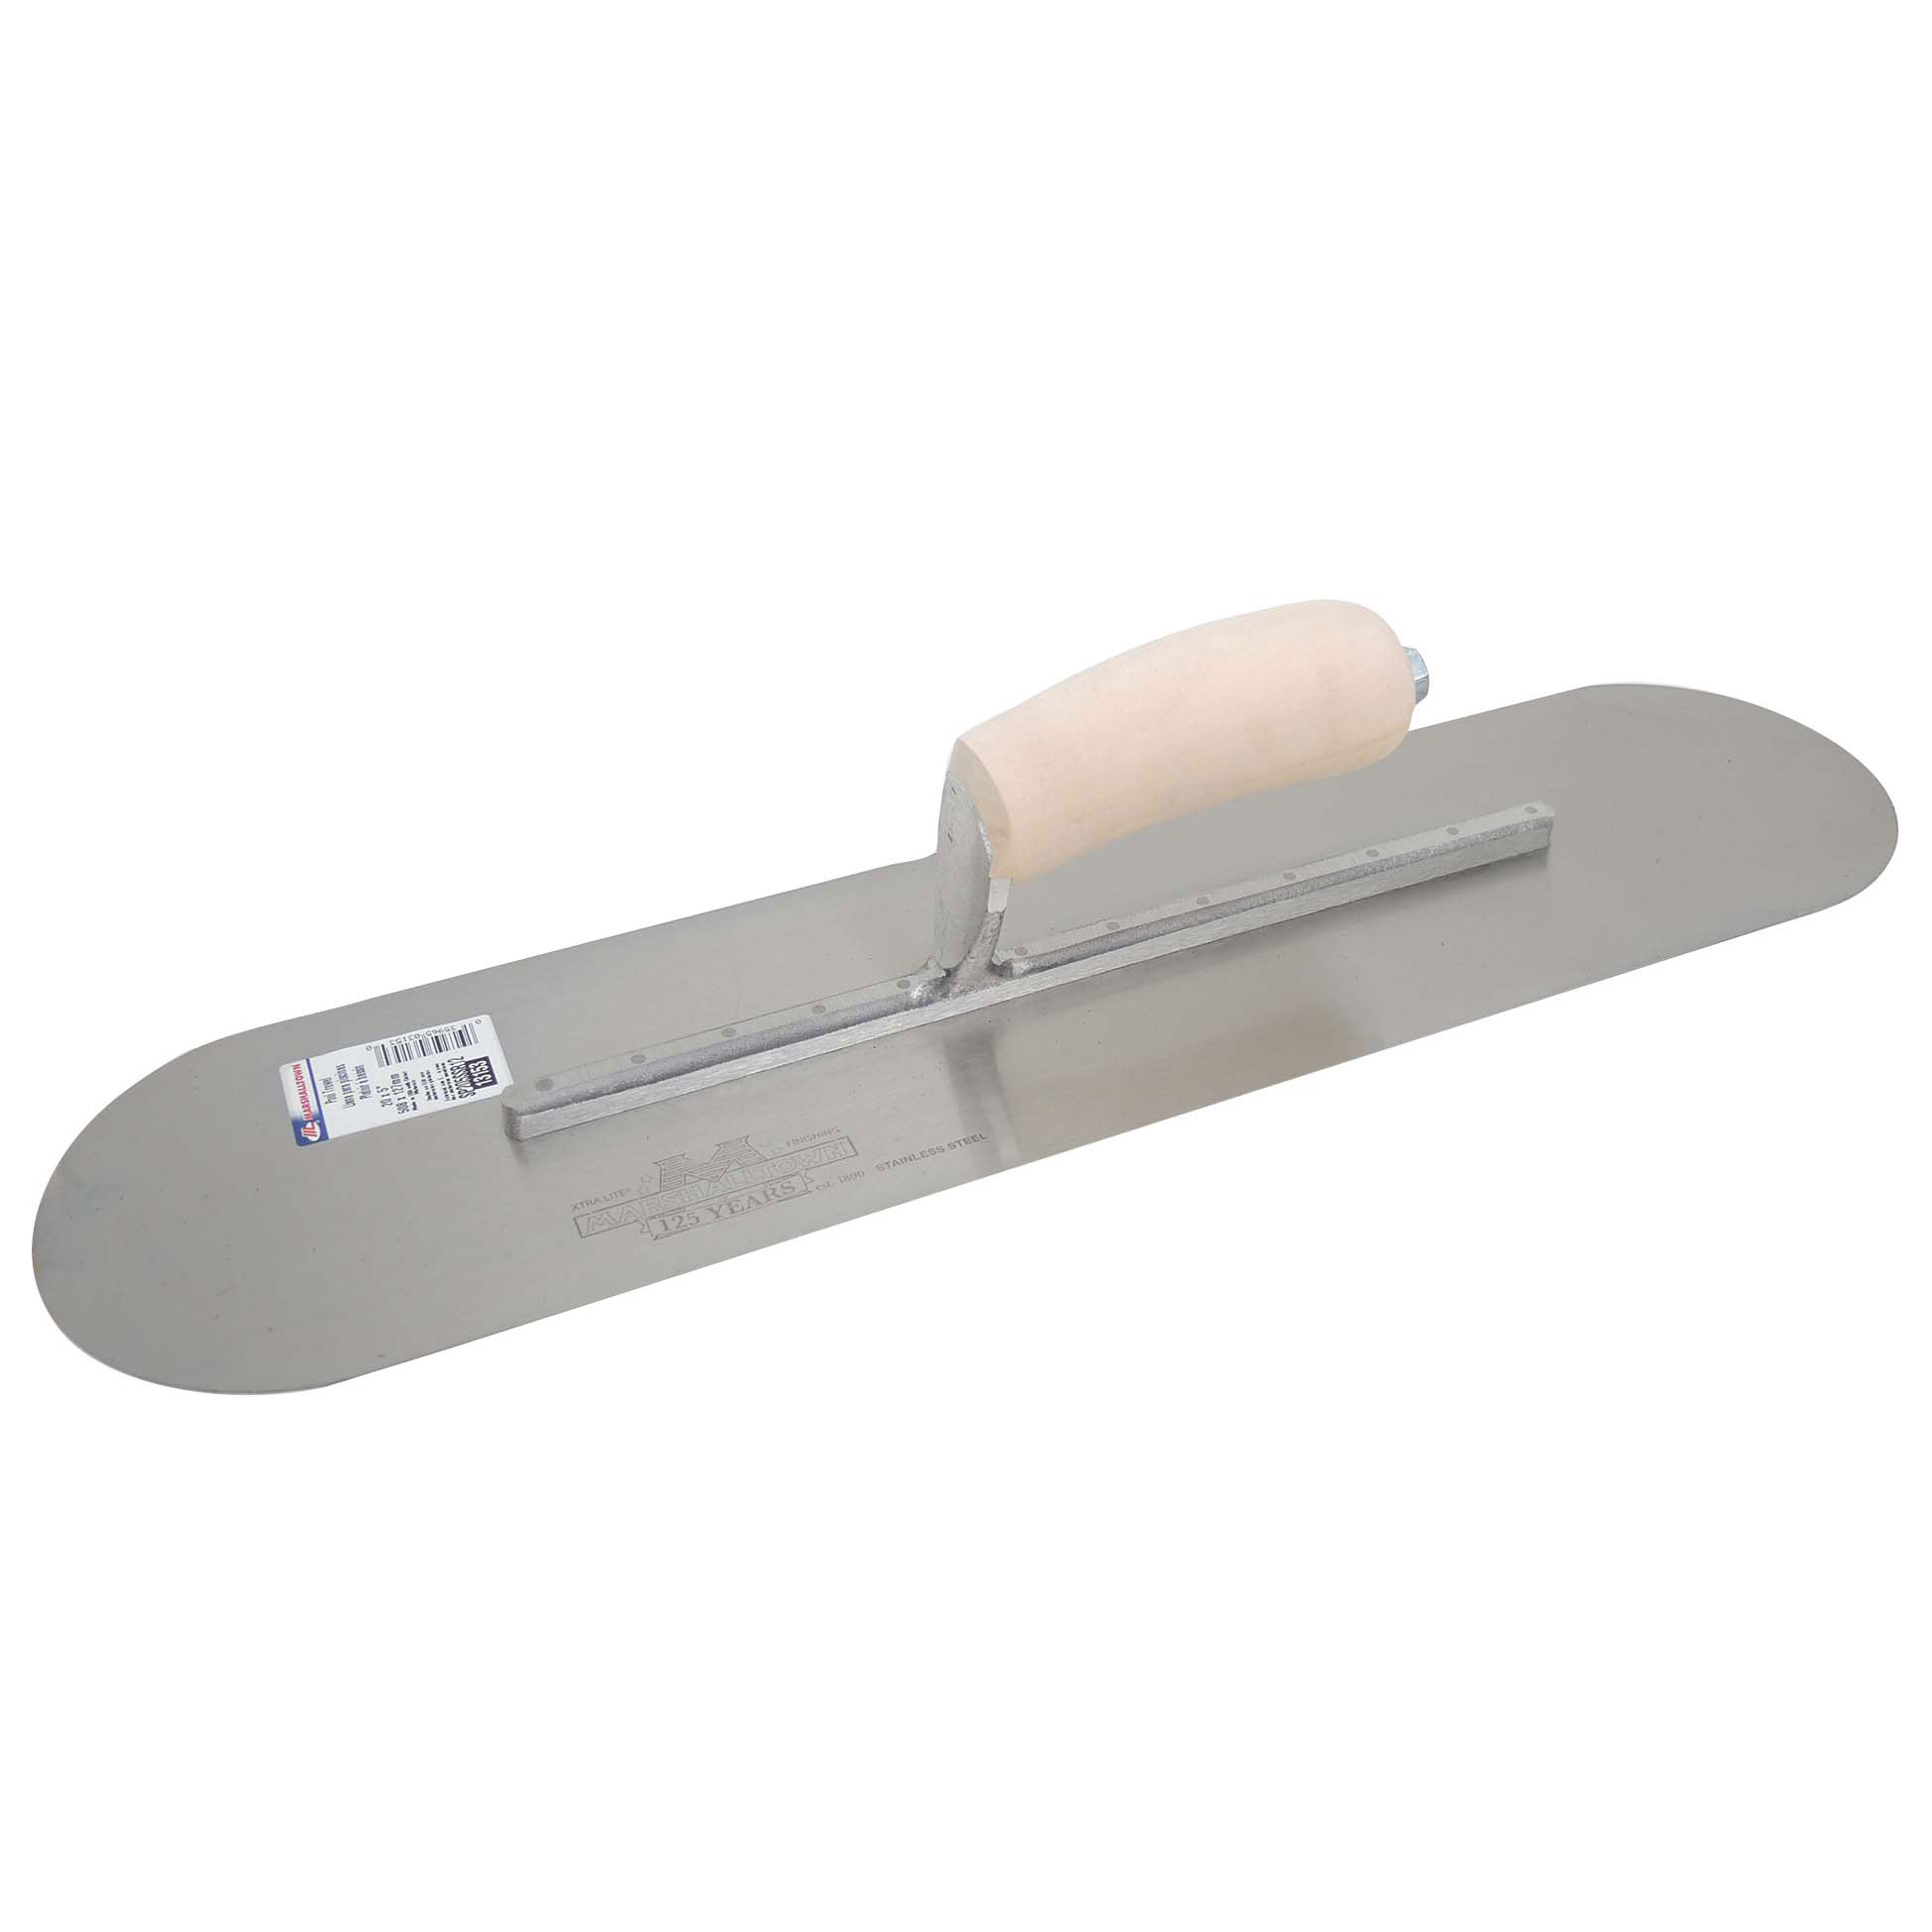 Marshalltown SP205SSR12 20in x 5in Pool Trowel with Exposed Rivet Trowels and Wood Handle SP205SSR12